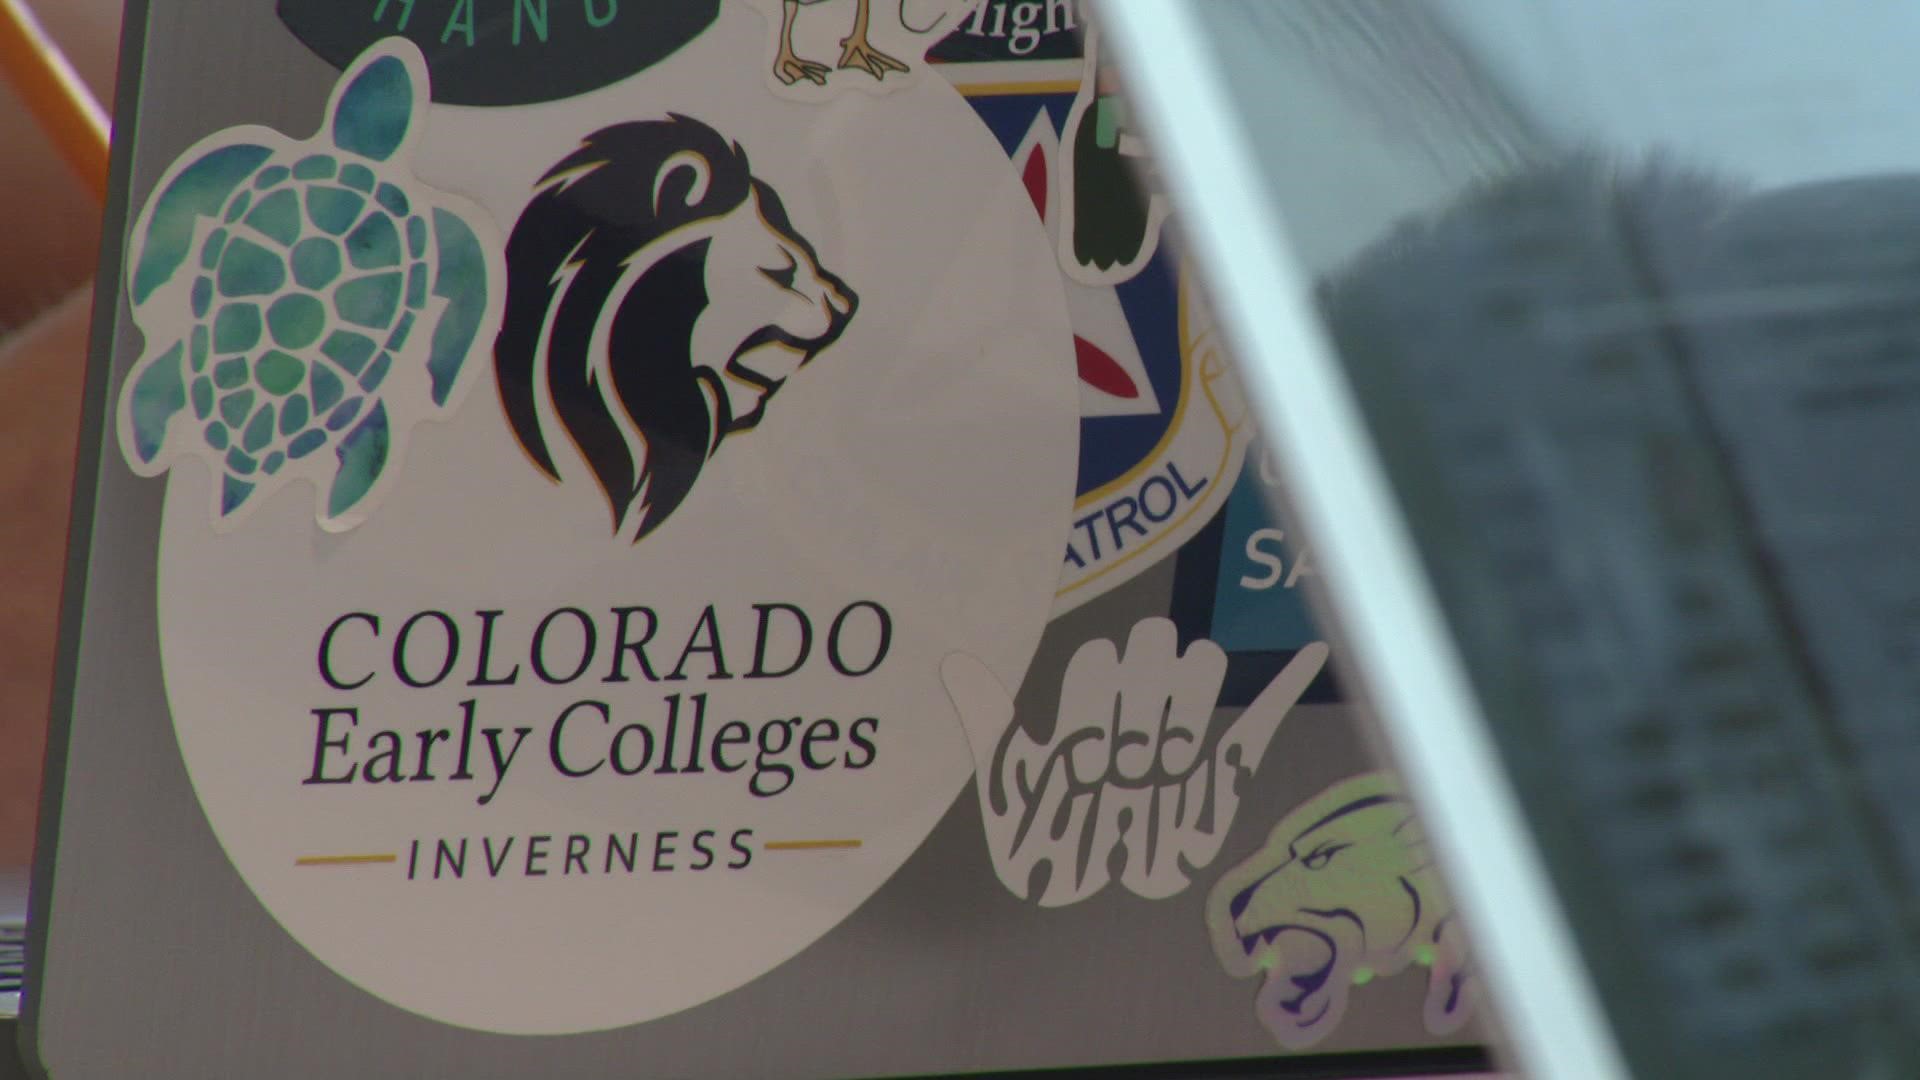 Colorado Early Colleges Inverness gives their students a head start on college with a customized education.